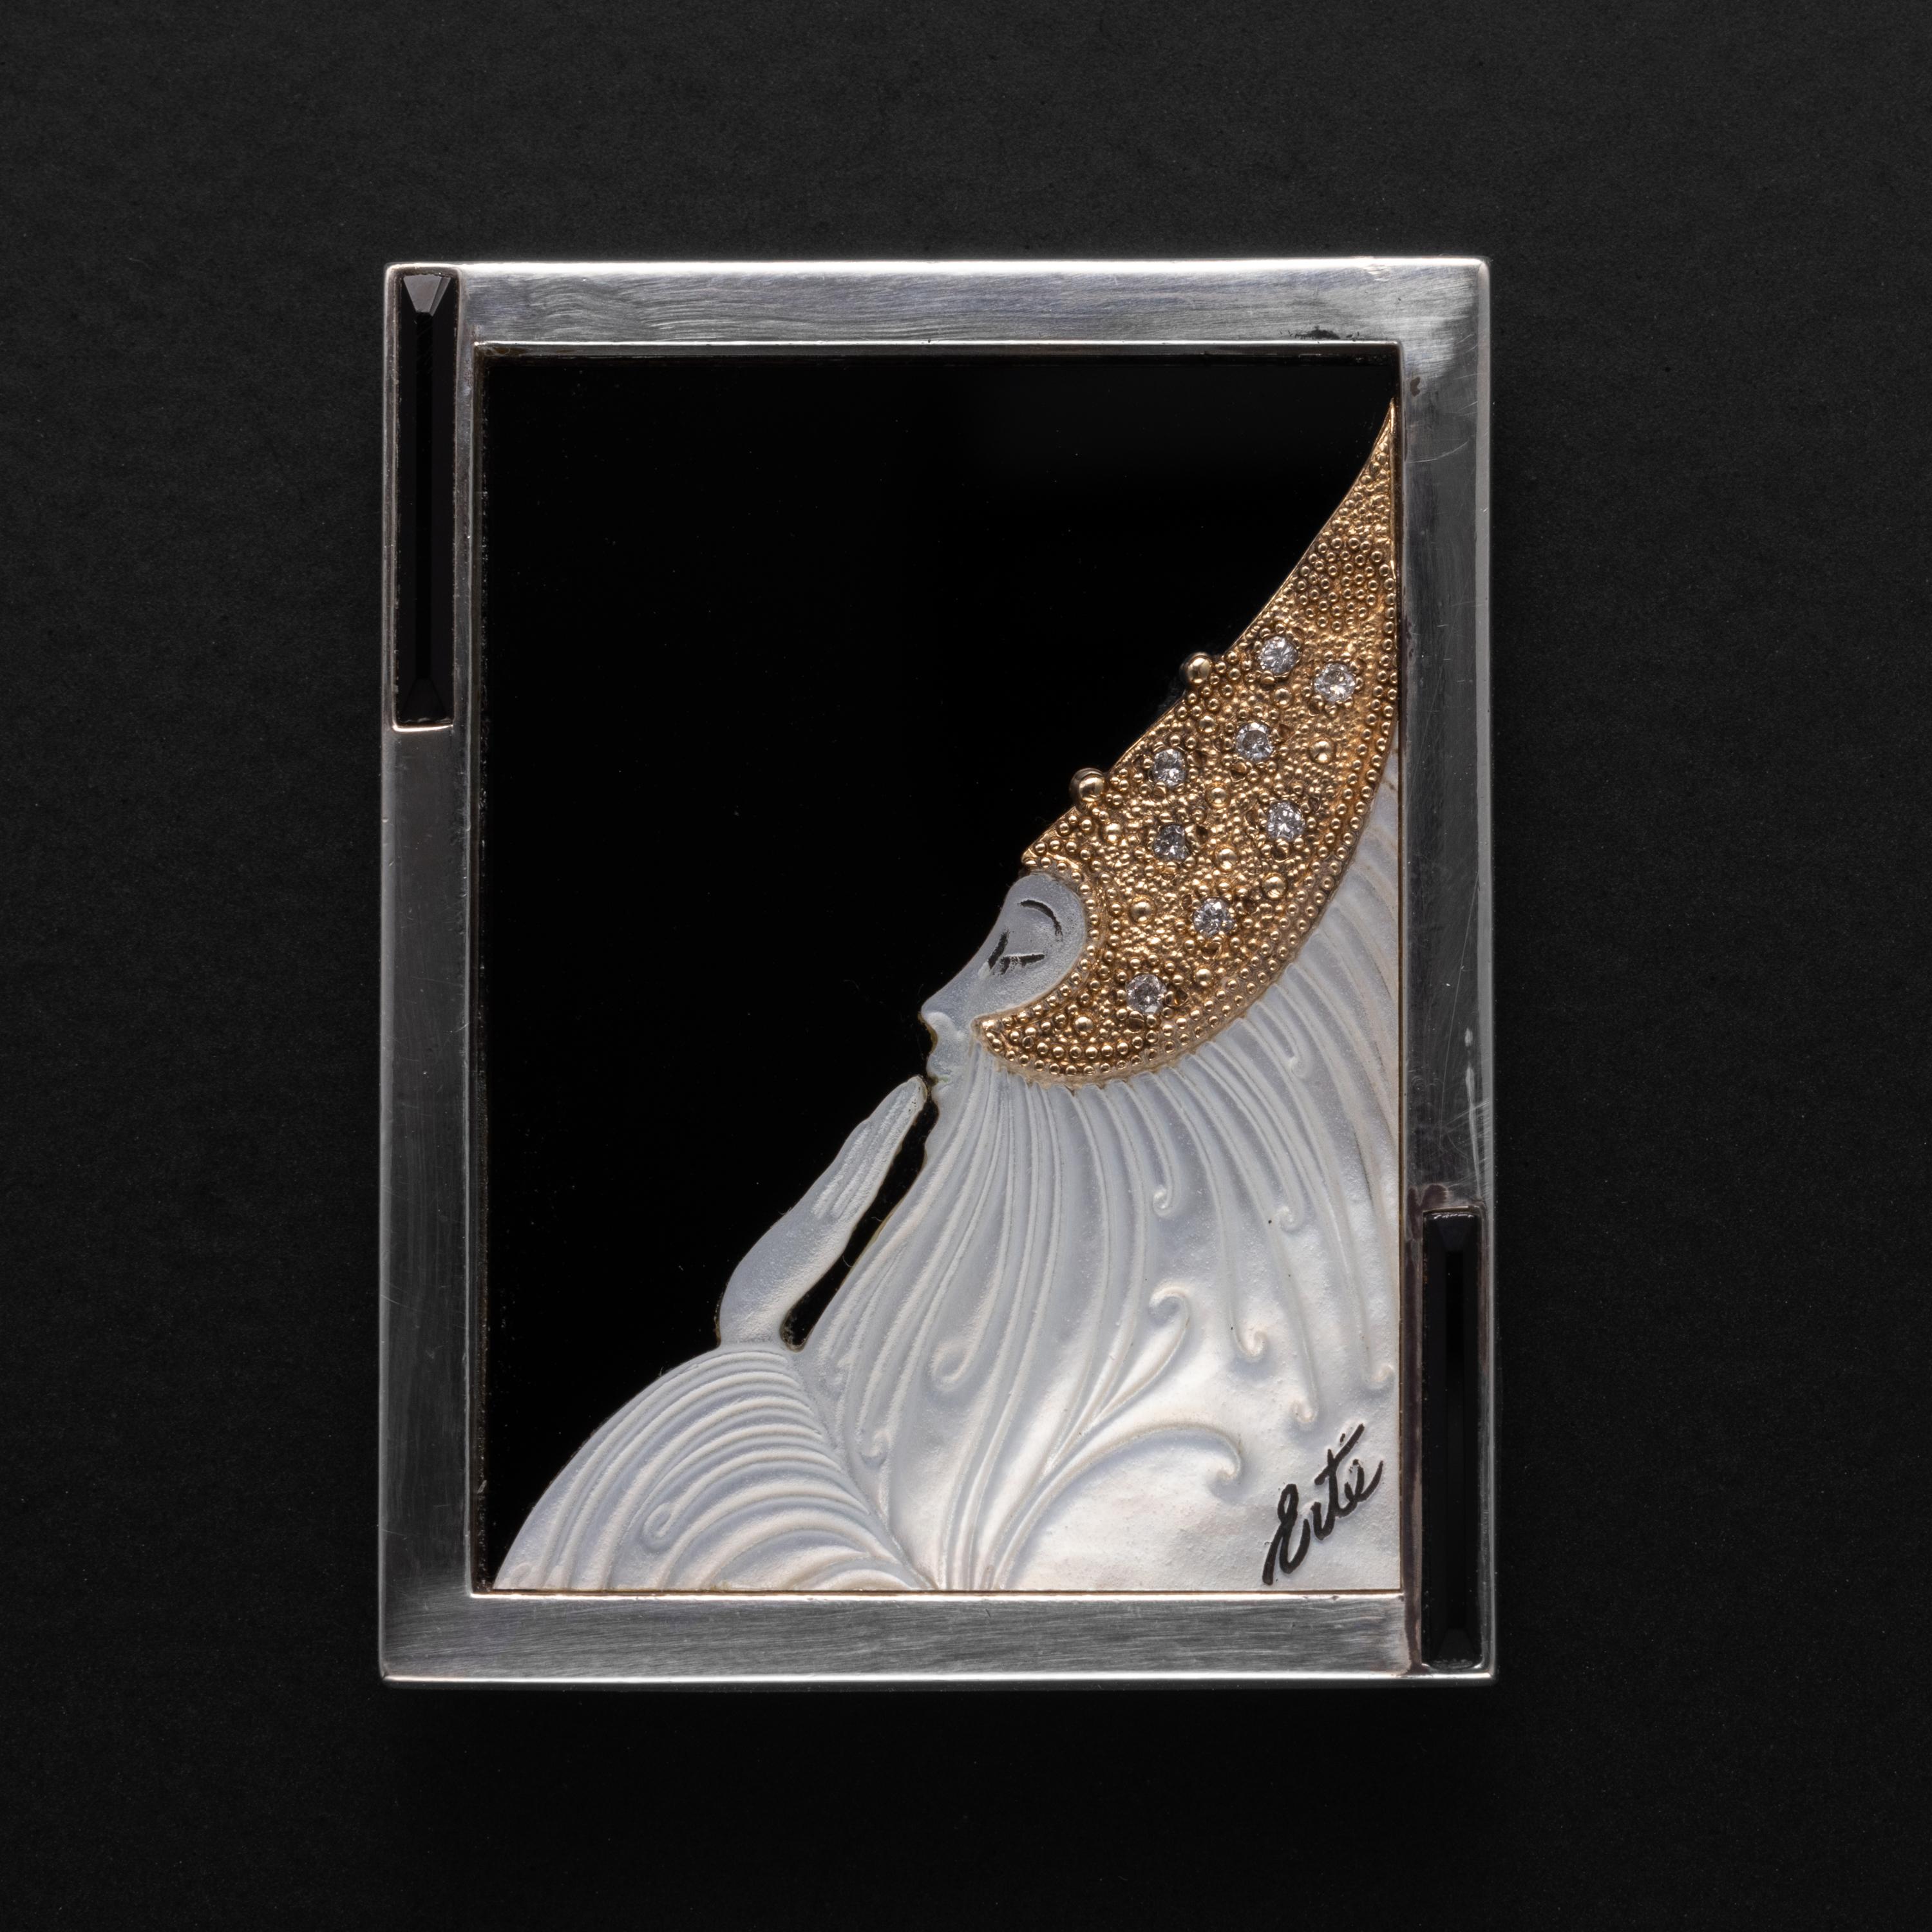 This is a rare, original limited edition Erté silver, 14K yellow gold, mother-of-pearl, and diamond brooch created in the early 1980s. This particular brooch is signed on the back, 